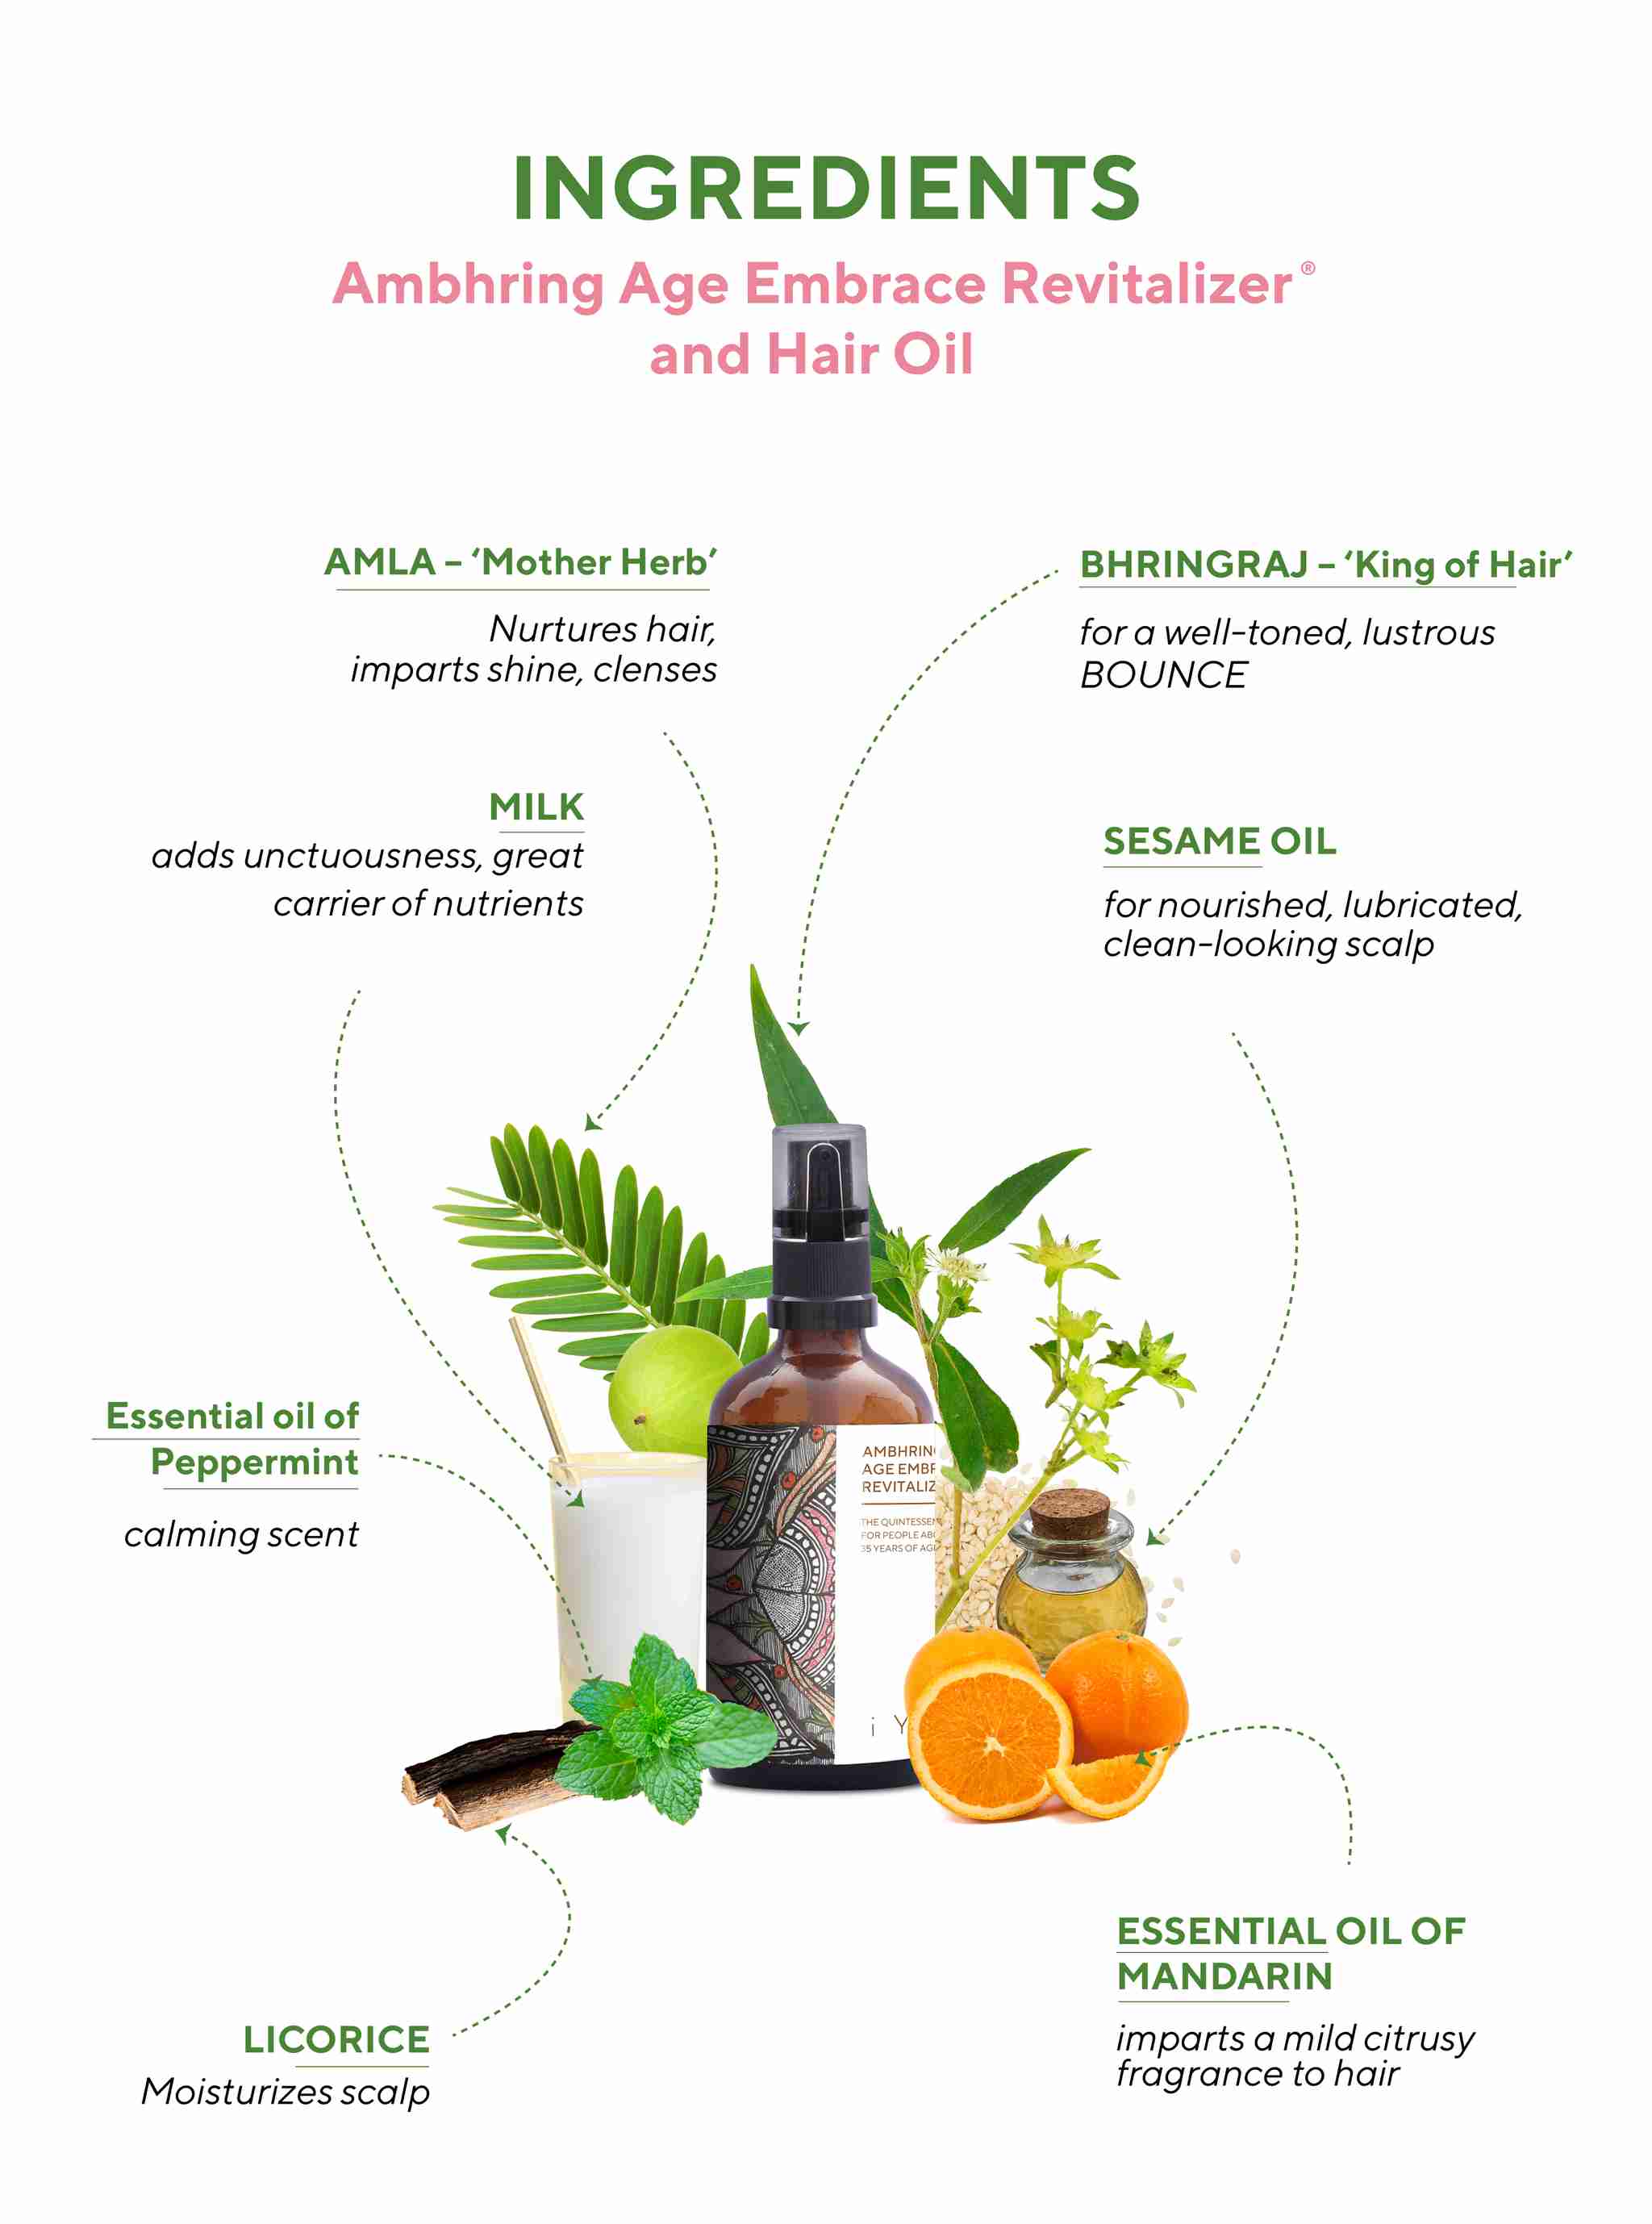 iYURA Ambhring Age Embrace Hair Revitalizer and Hair Oil : Ingredients & Benefits